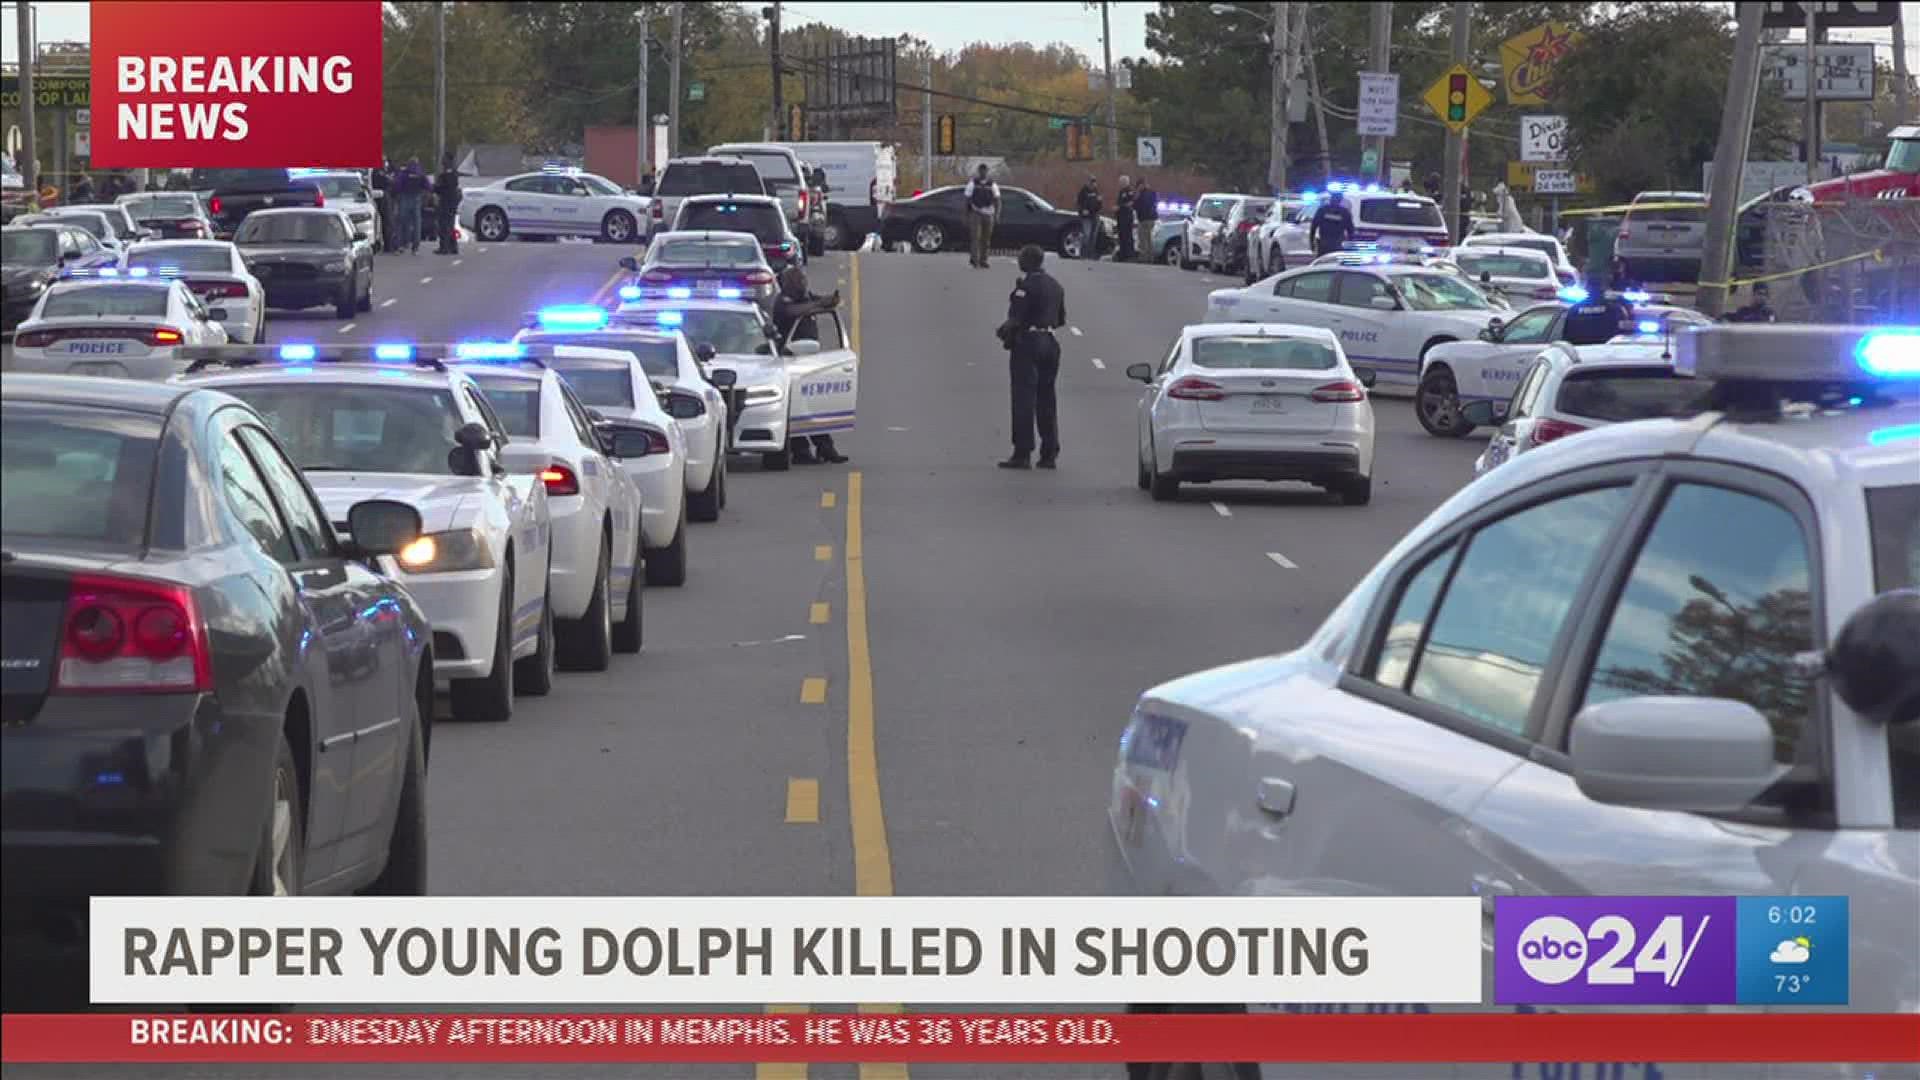 Memphis Police said "preliminary information indicates" rapper Young Dolph was shot and killed Wednesday outside Makeda's Cookies on Airways Boulevard.